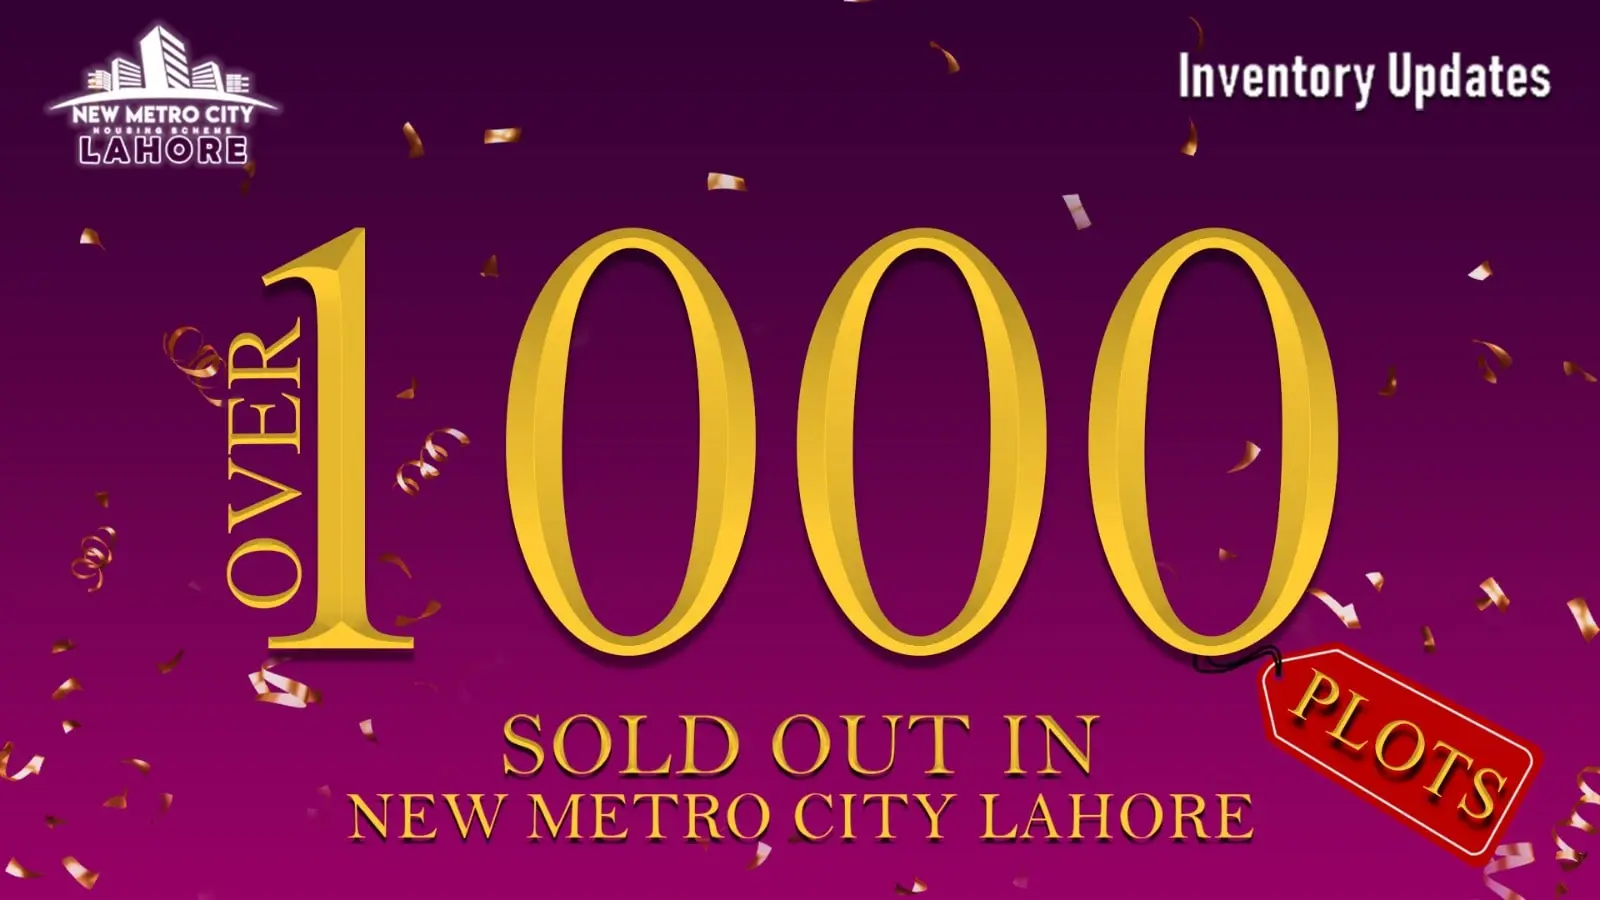 1000 Plots Sold Out in New Metro City Lahore